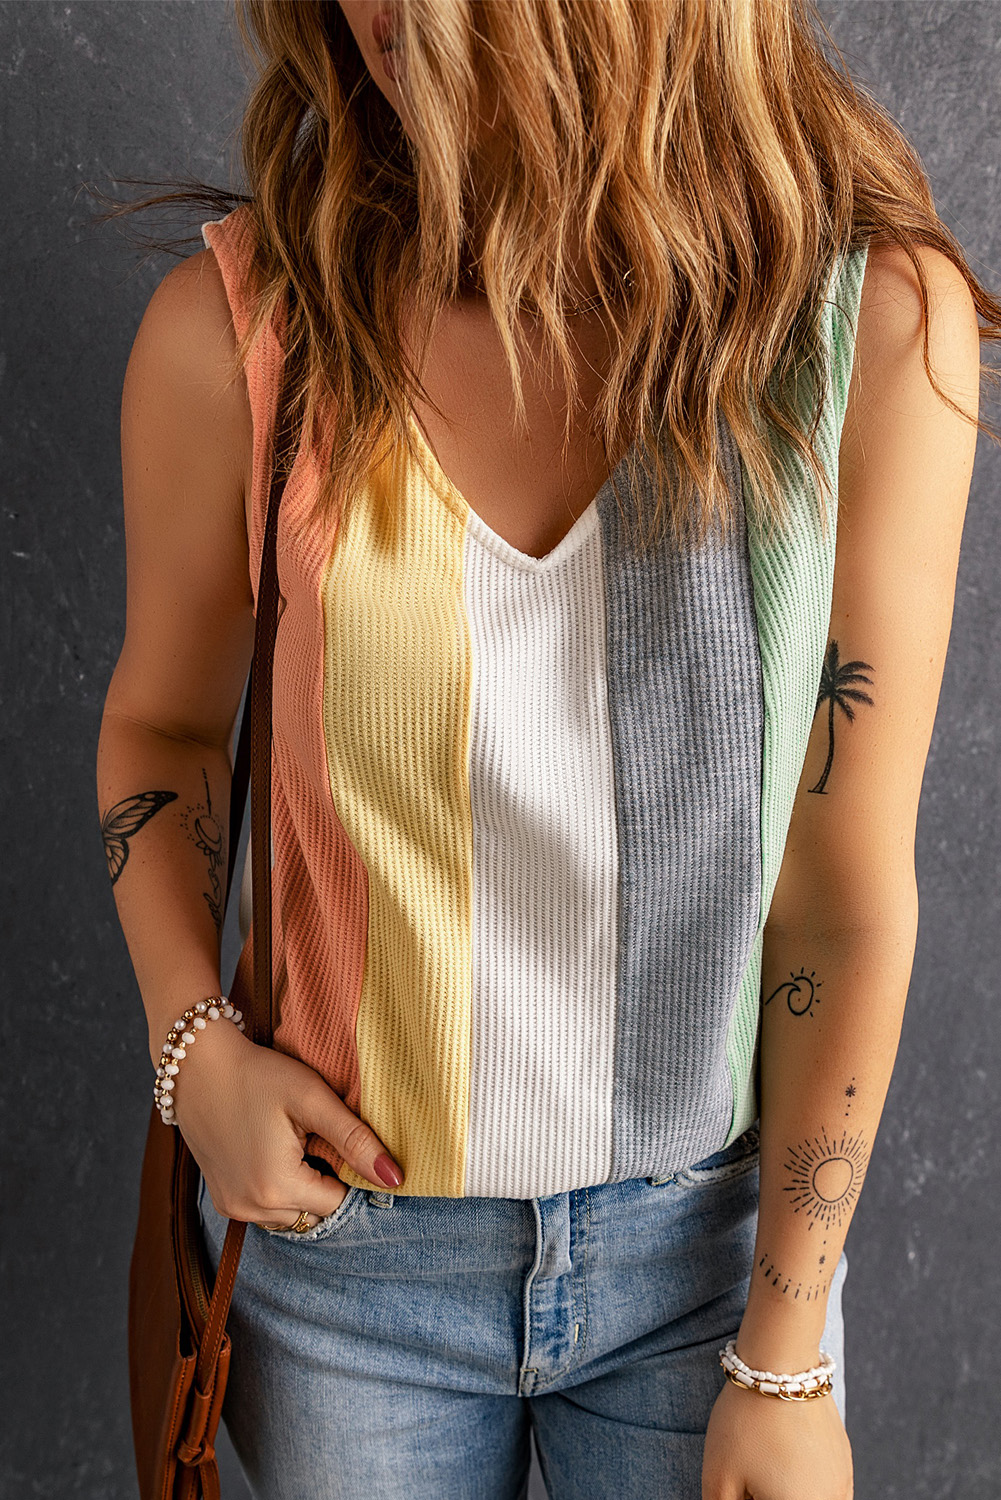 Shewin Wholesale Clothes Multicolor Color Block Casual V Neck Waffle Knit TANK TOP